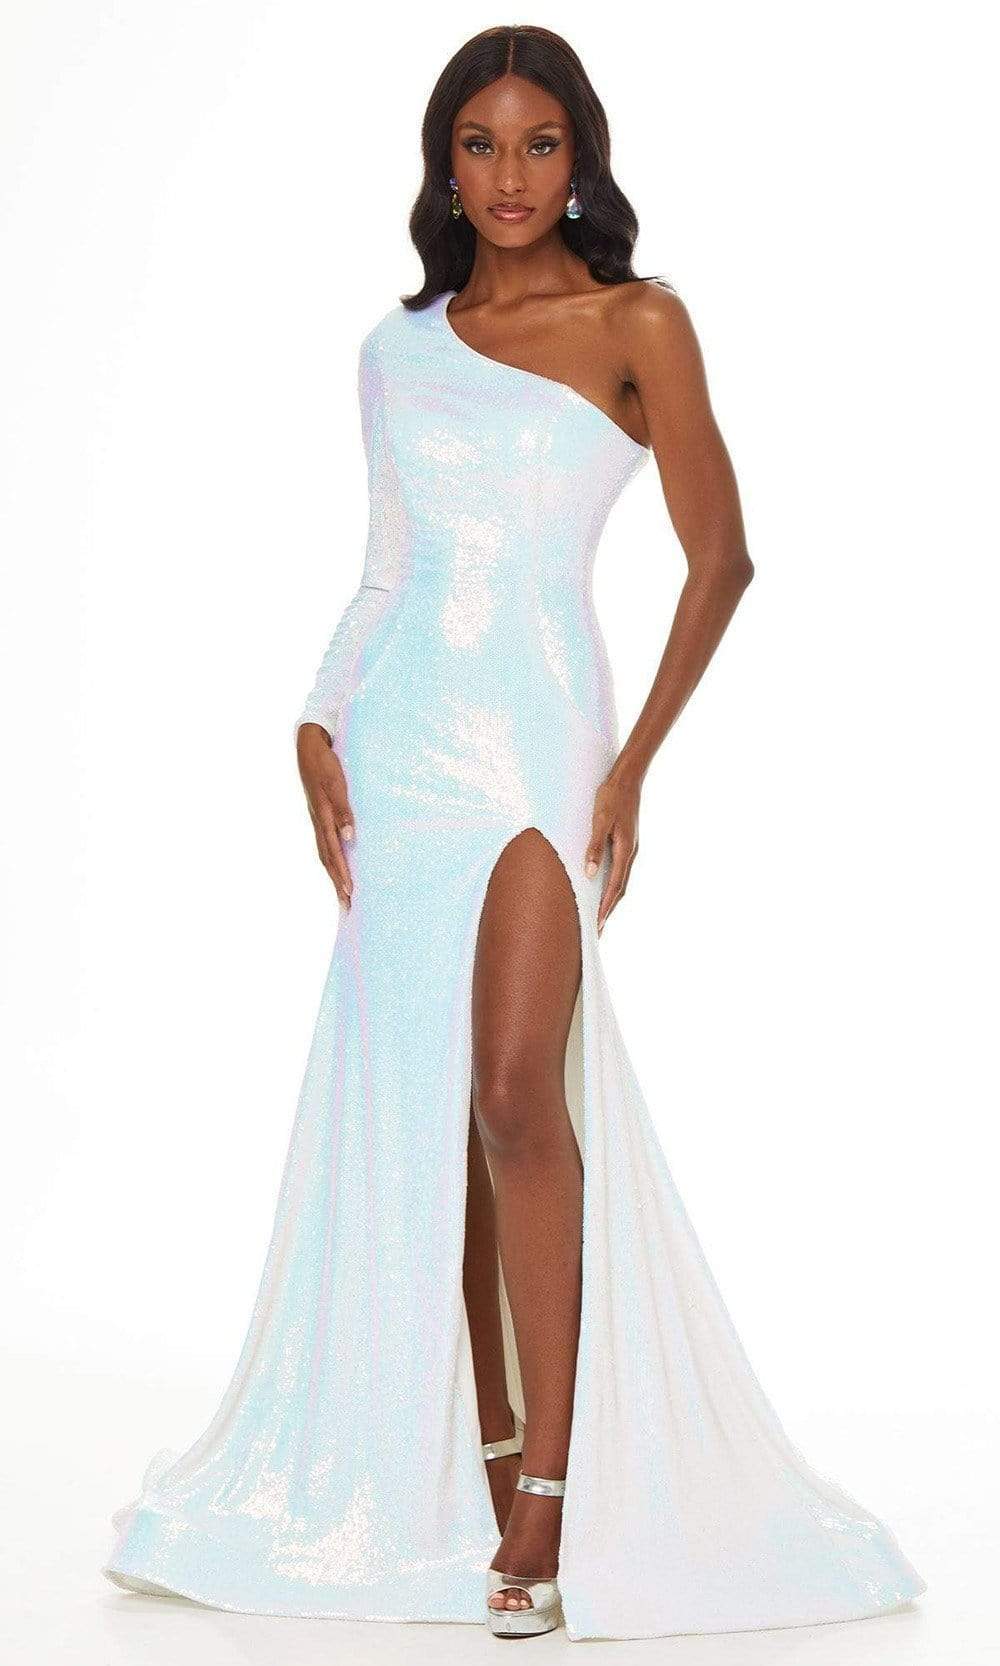 Image of Ashley Lauren - 11026 Long Sleeve Sequined High Slit Gown